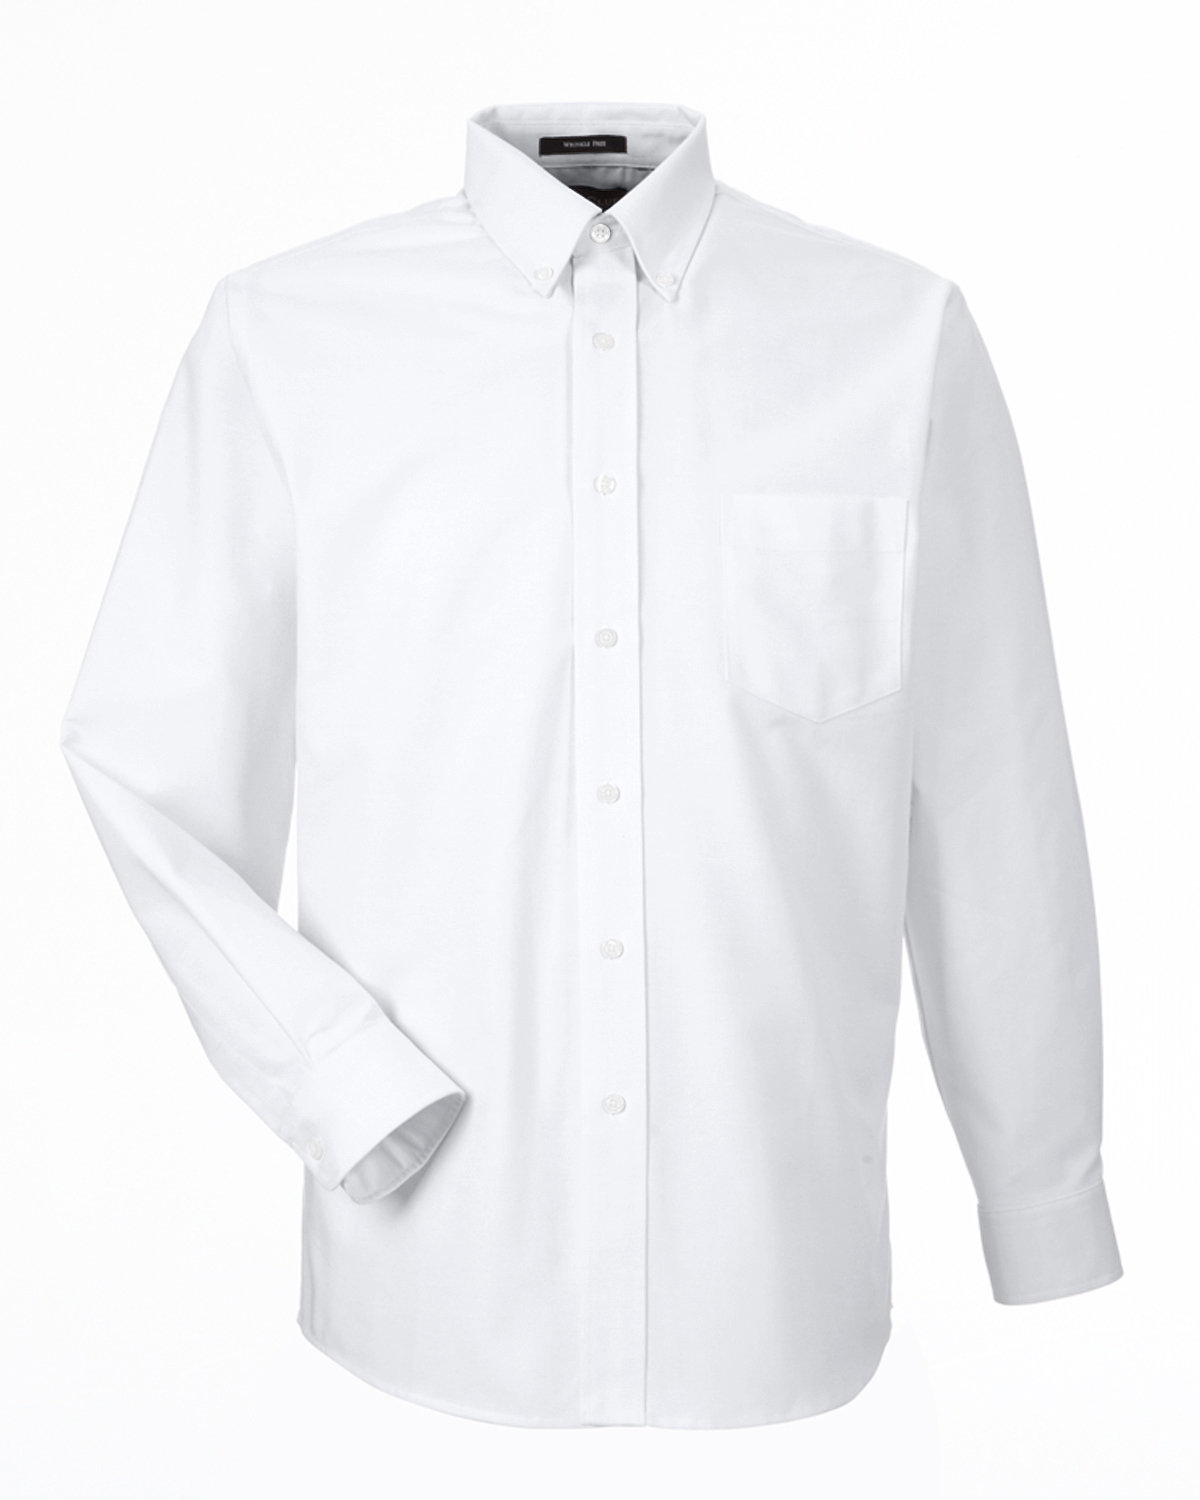 UltraClub Men's Classic Wrinkle-Resistant Long-Sleeve Oxford | alphabroder